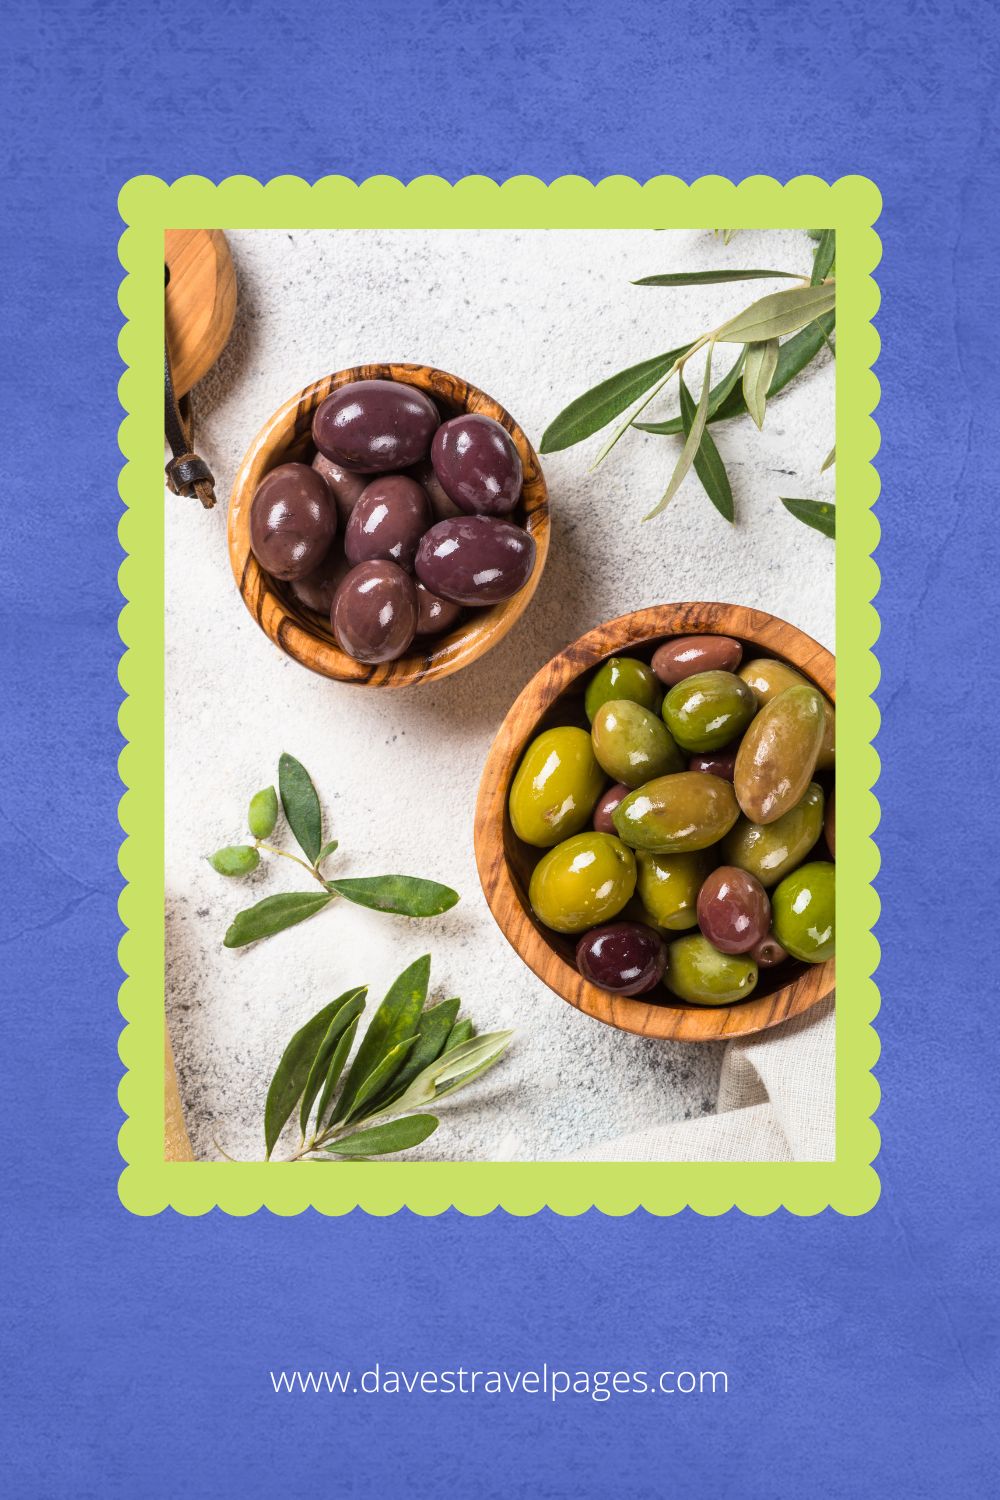 Olives are a healthy food to take on a road trip